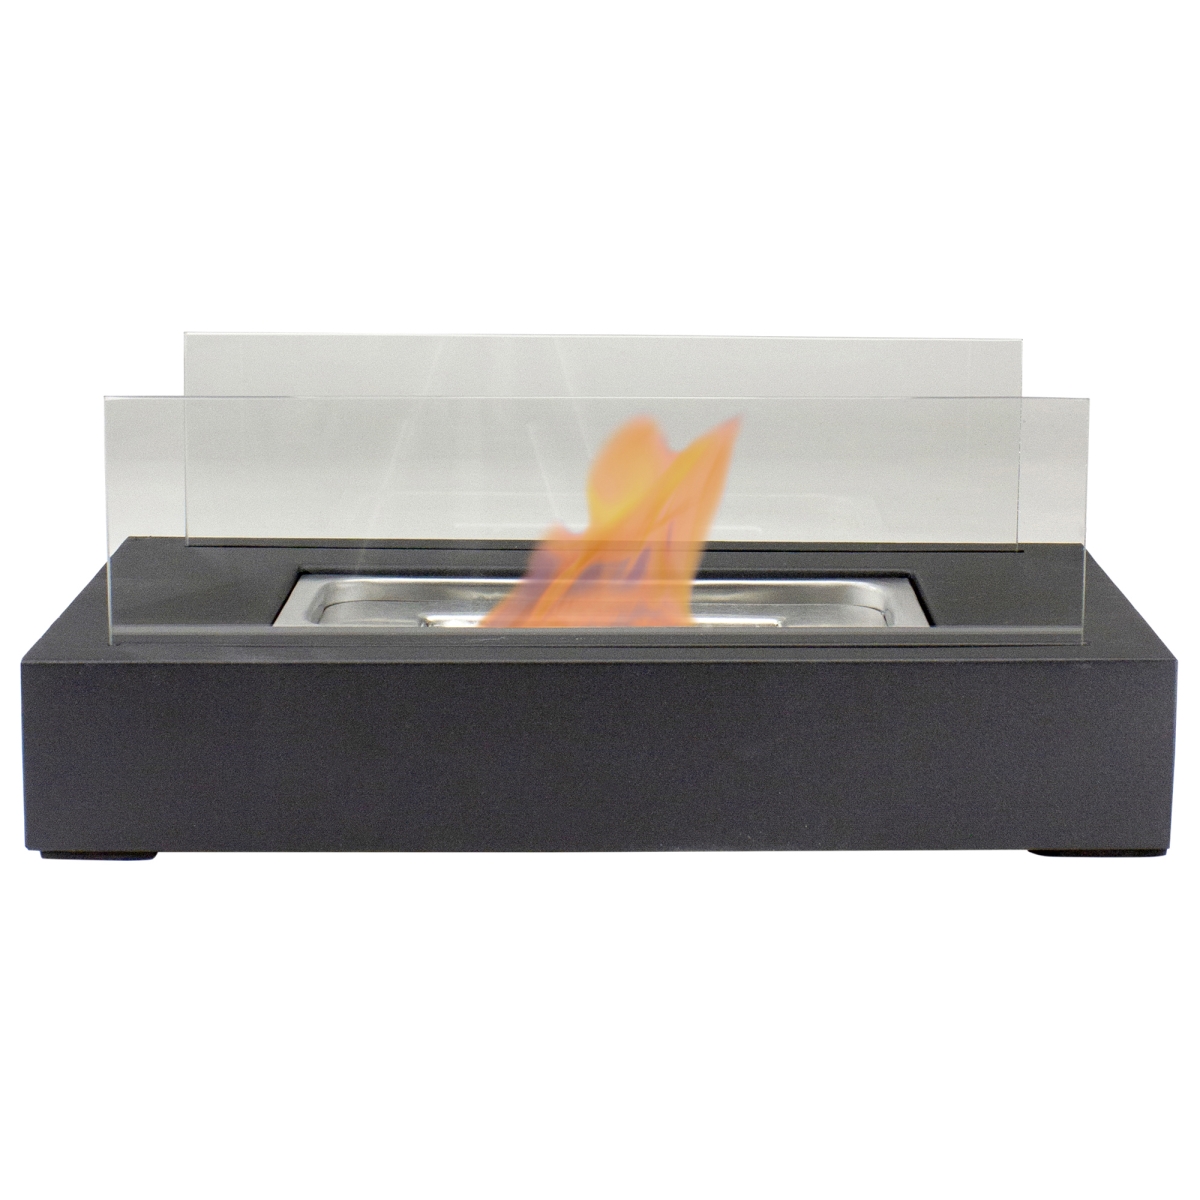 Picture of NorthLight 34808728 13.75 in. Bio Ethanol Ventless Portable Tabletop Fireplace with Flame Guard